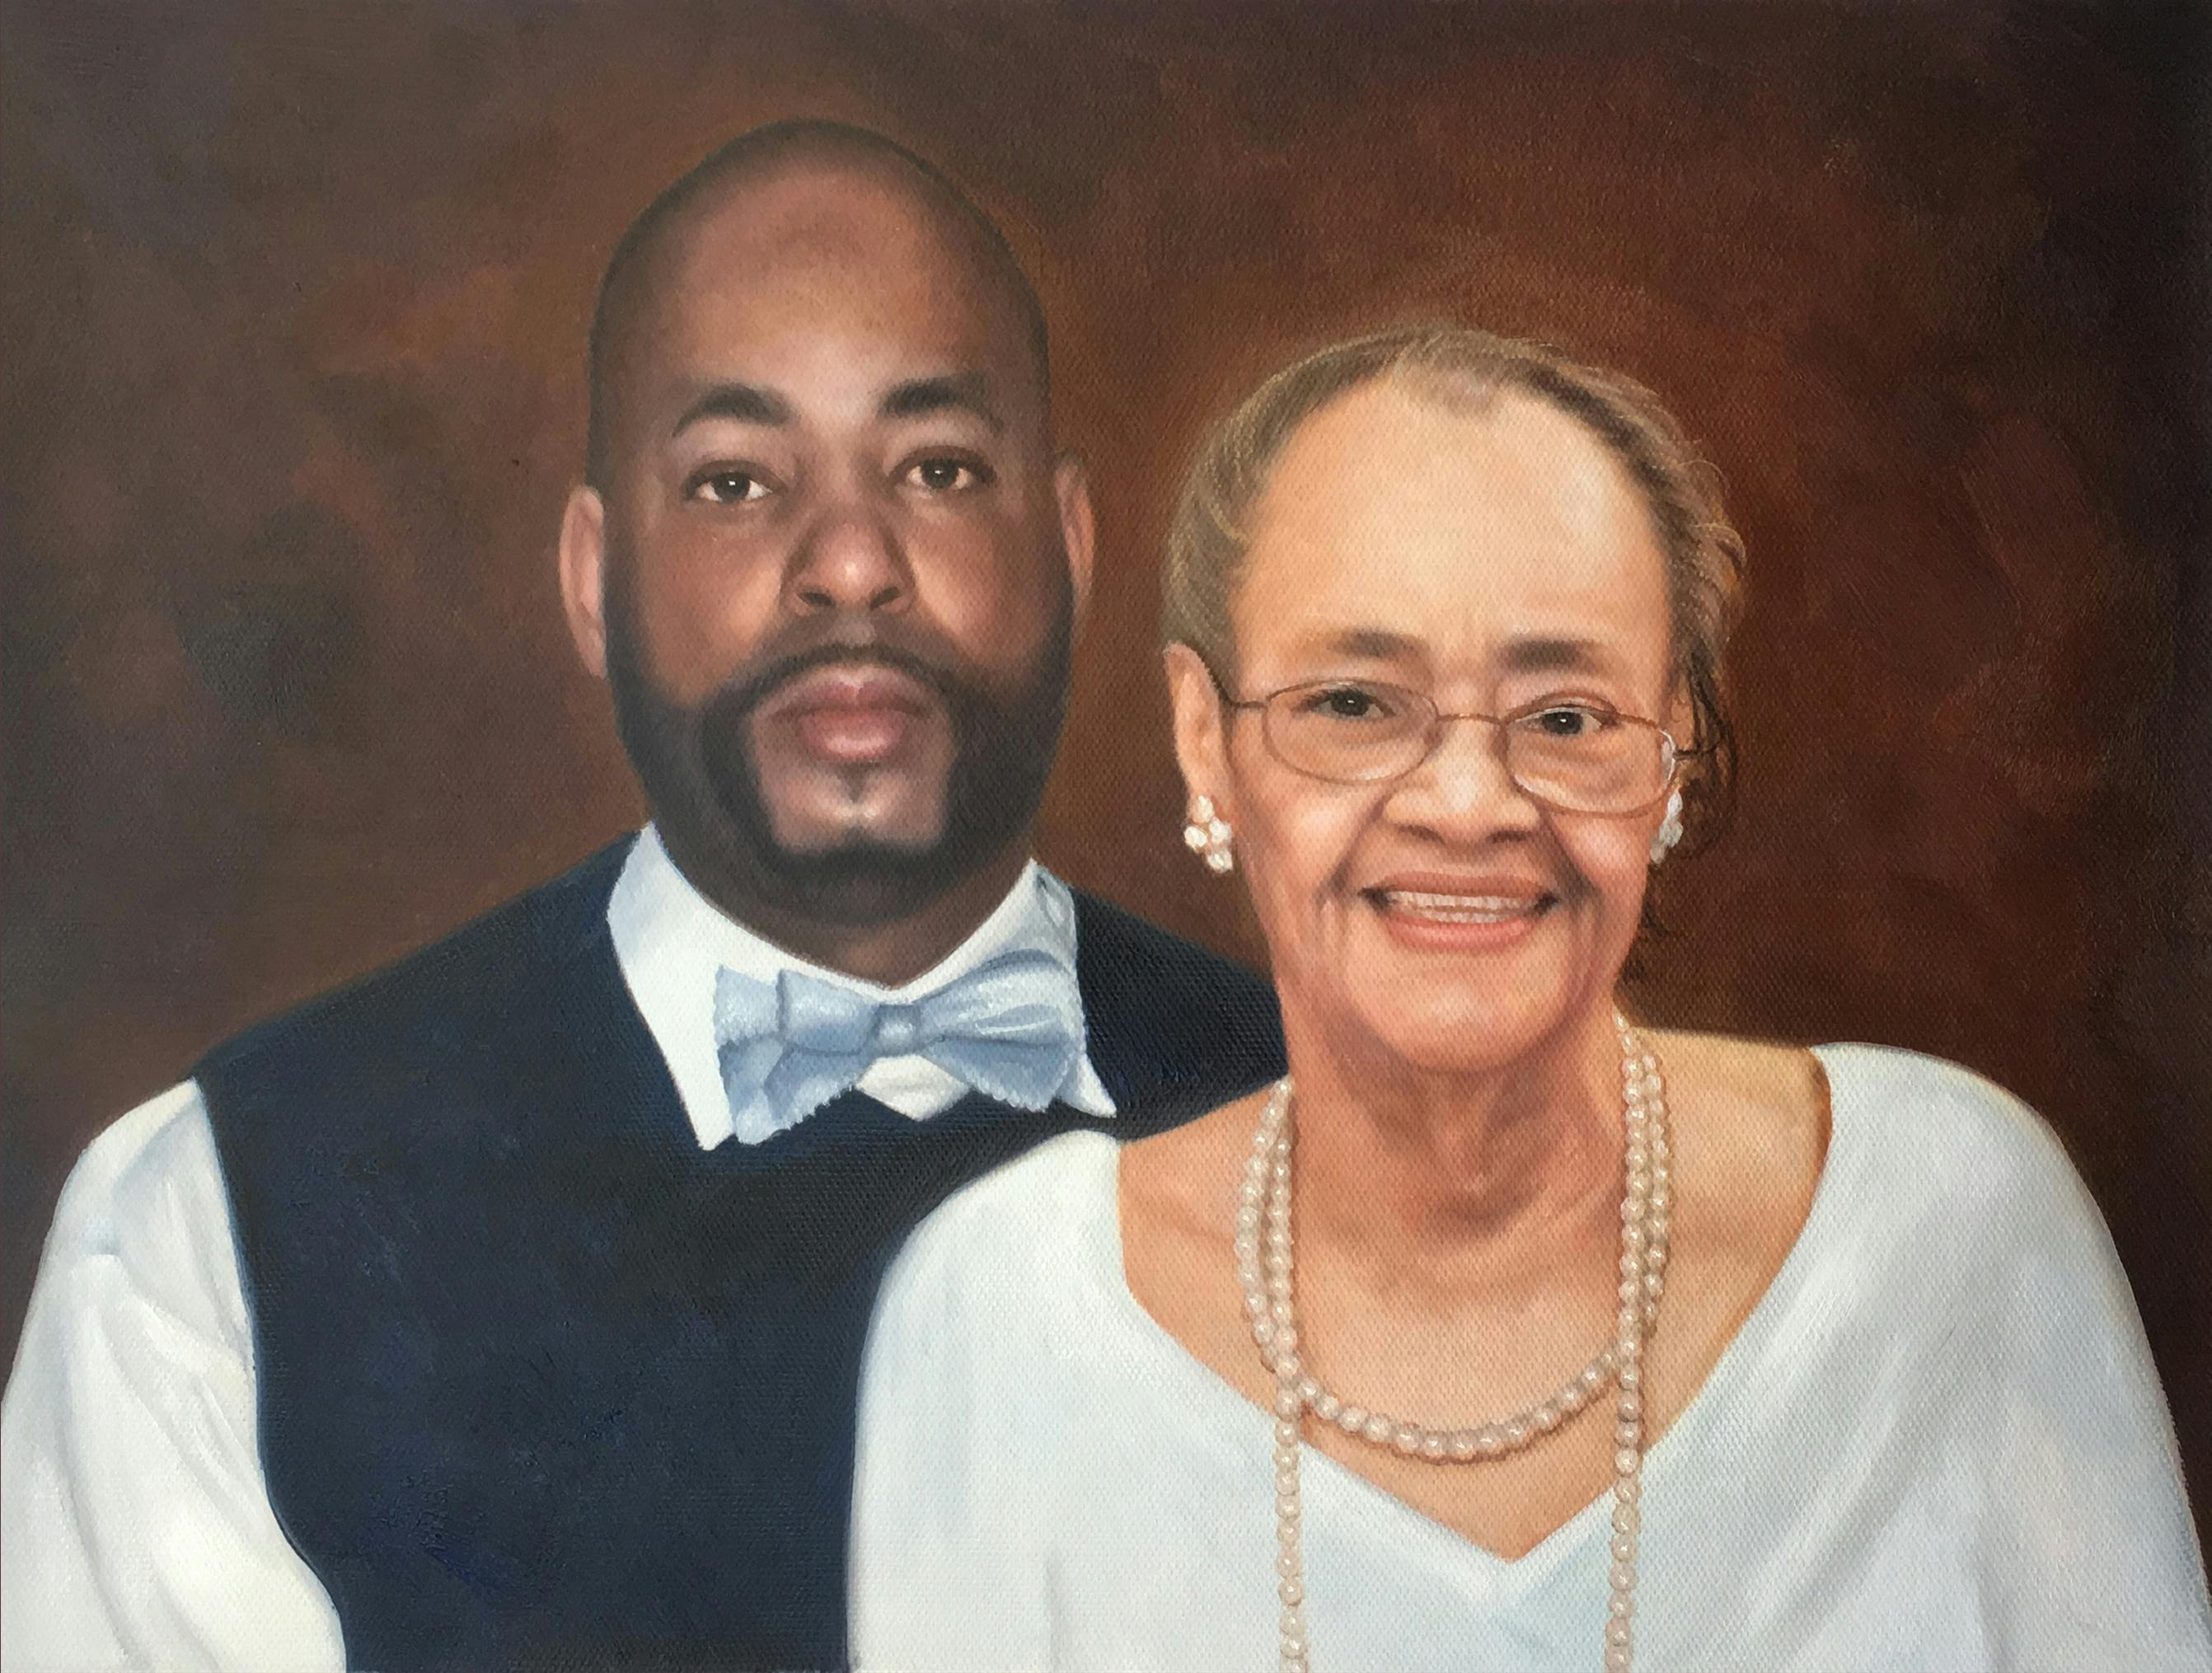 Oil painting portrait of a man and his grandmother on a brown background.